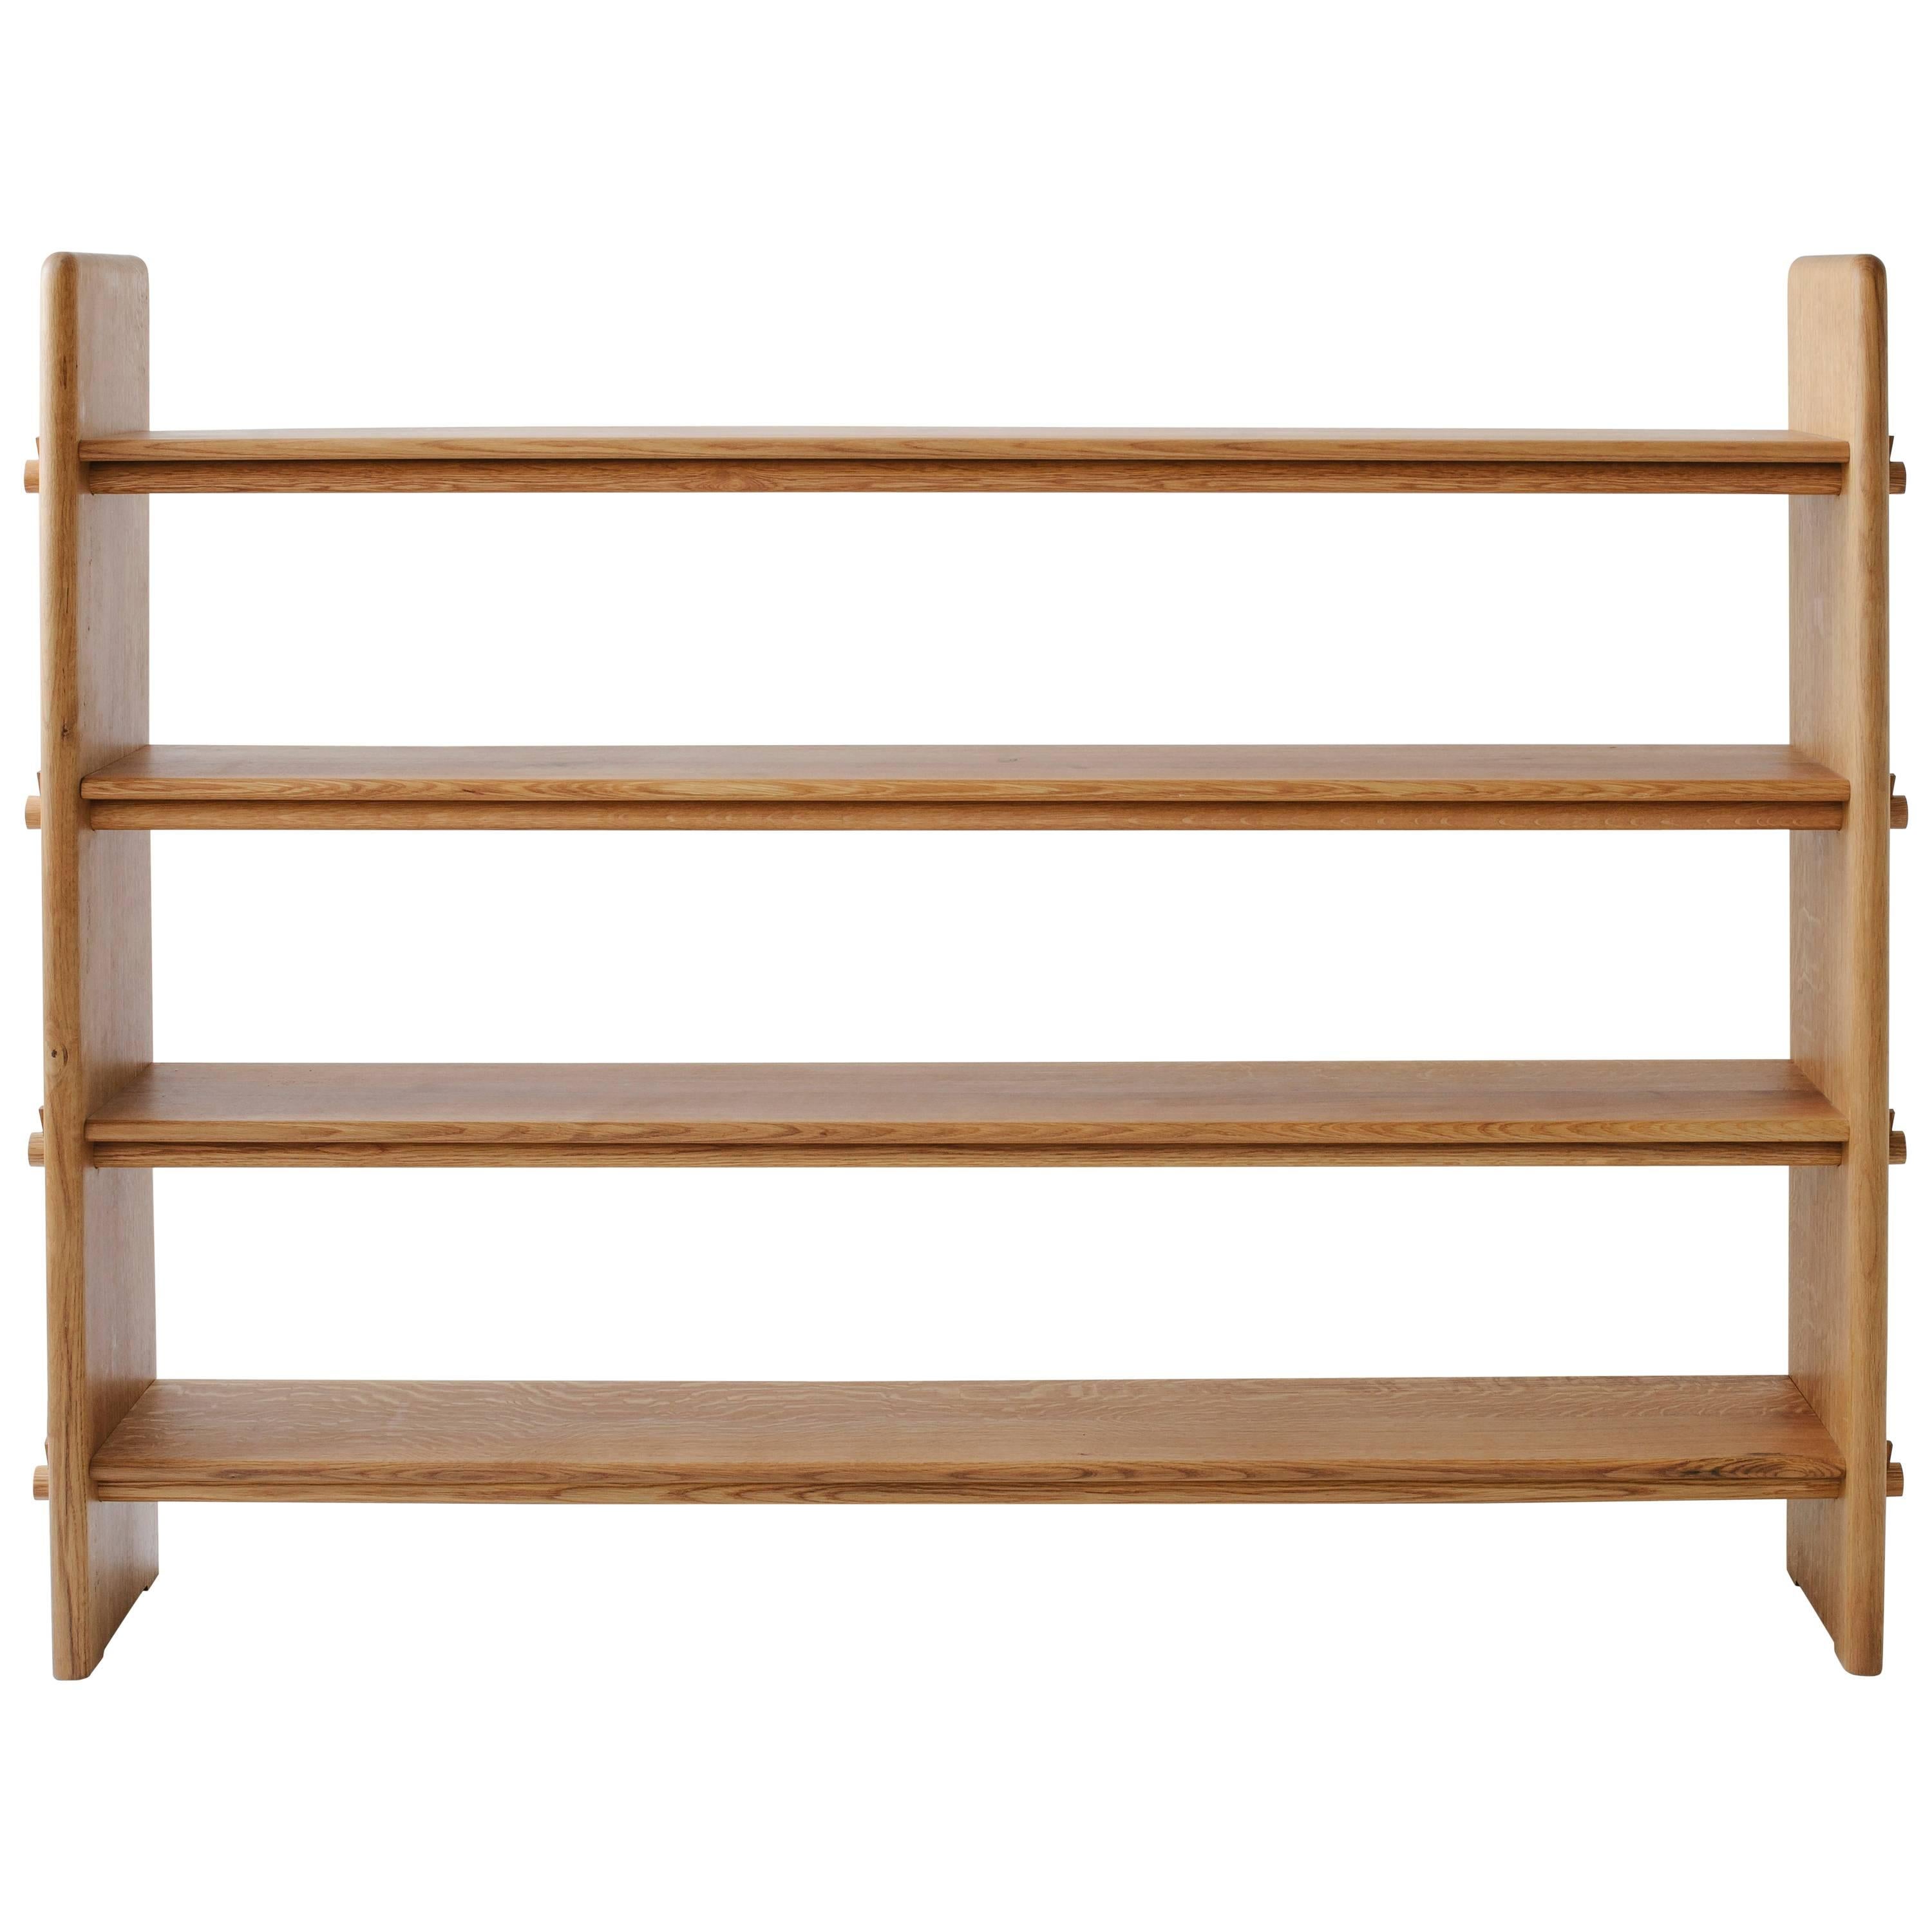 Contemporary Pin Shelf in White Oak Wood by Fort Standard, in Stock For Sale